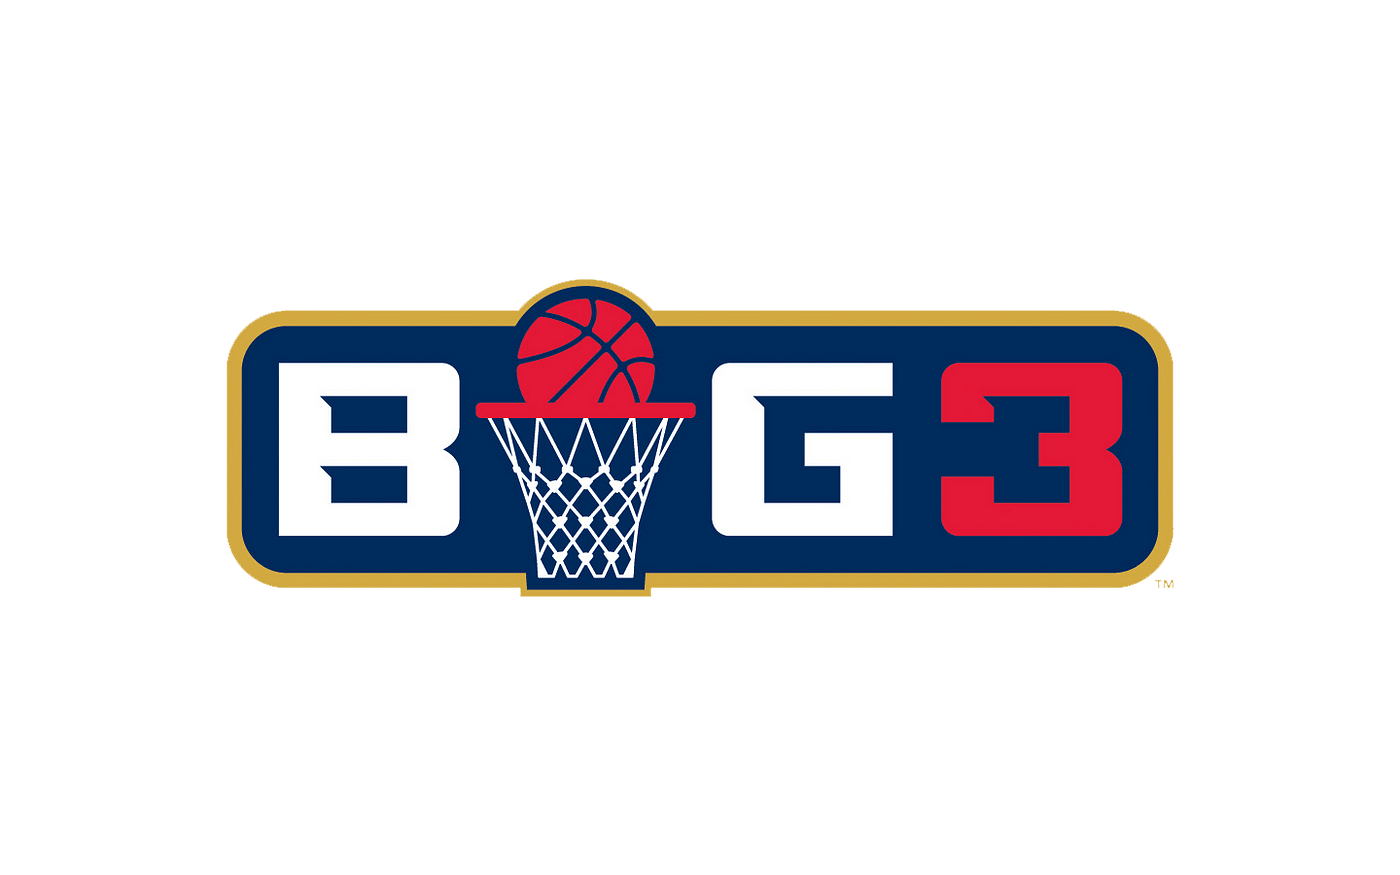 Trilogy Wins the First Big3 Basketball Championship - The New York Times